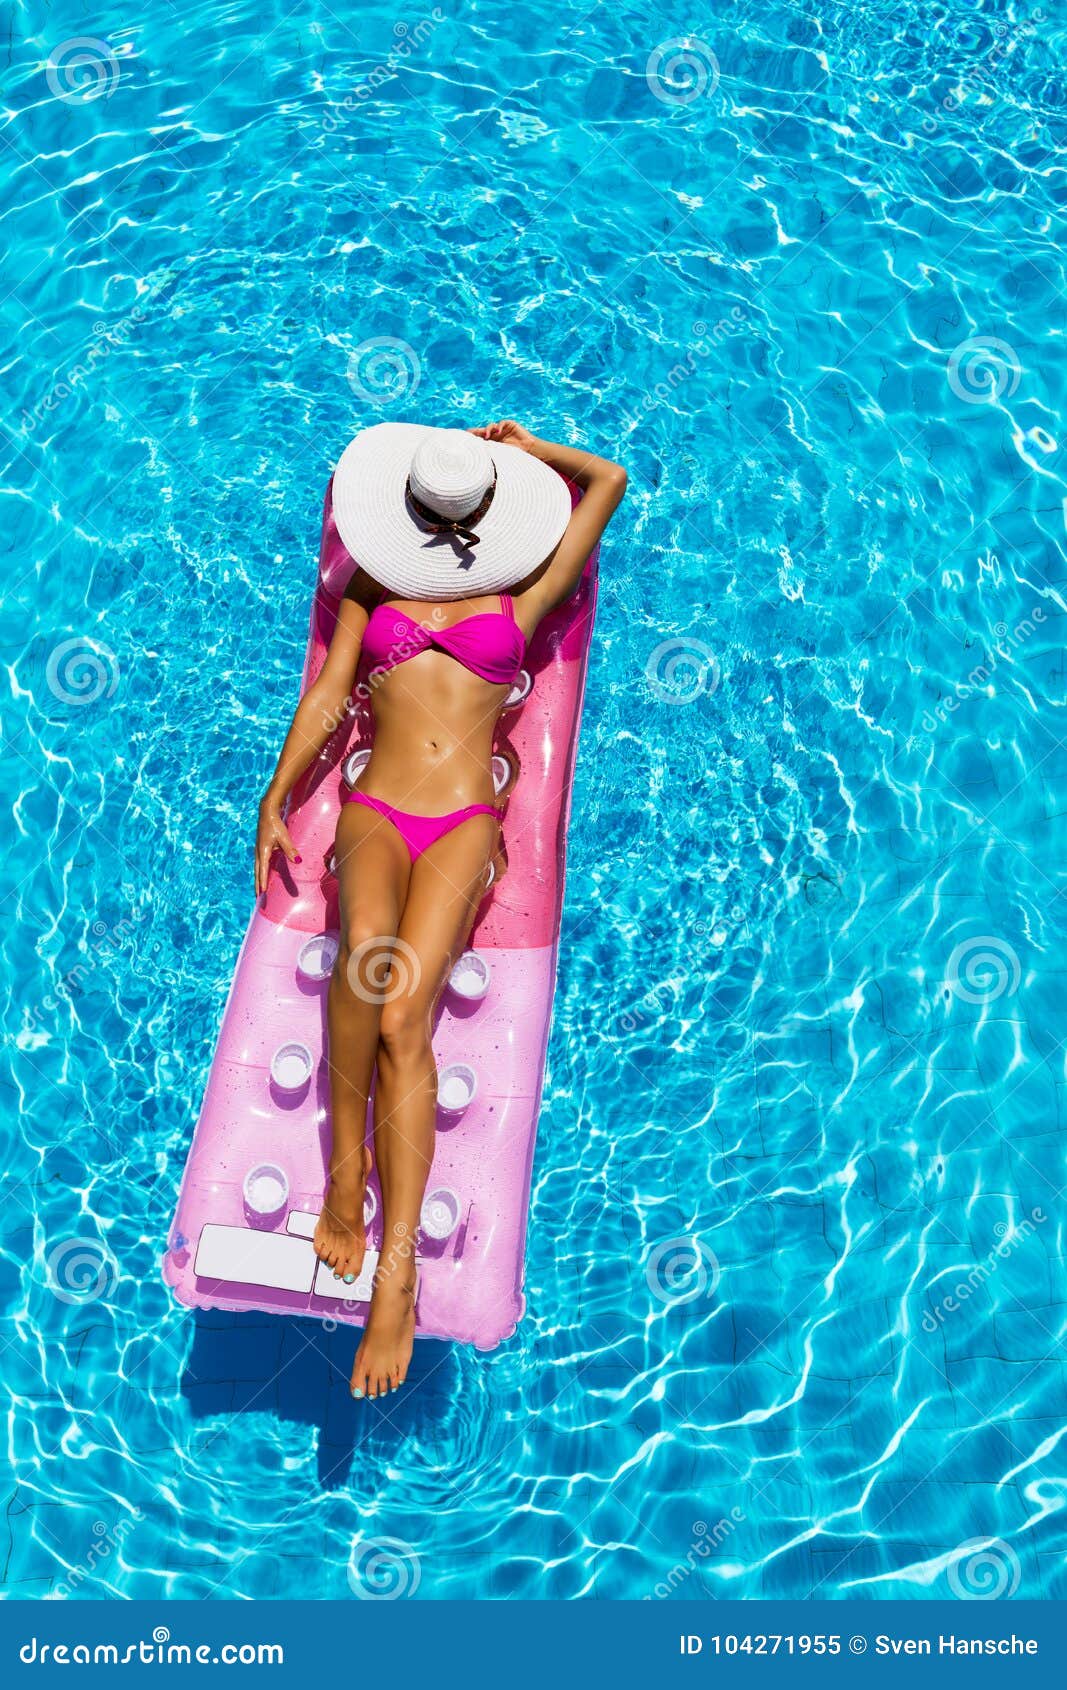 woman on a float in the pool